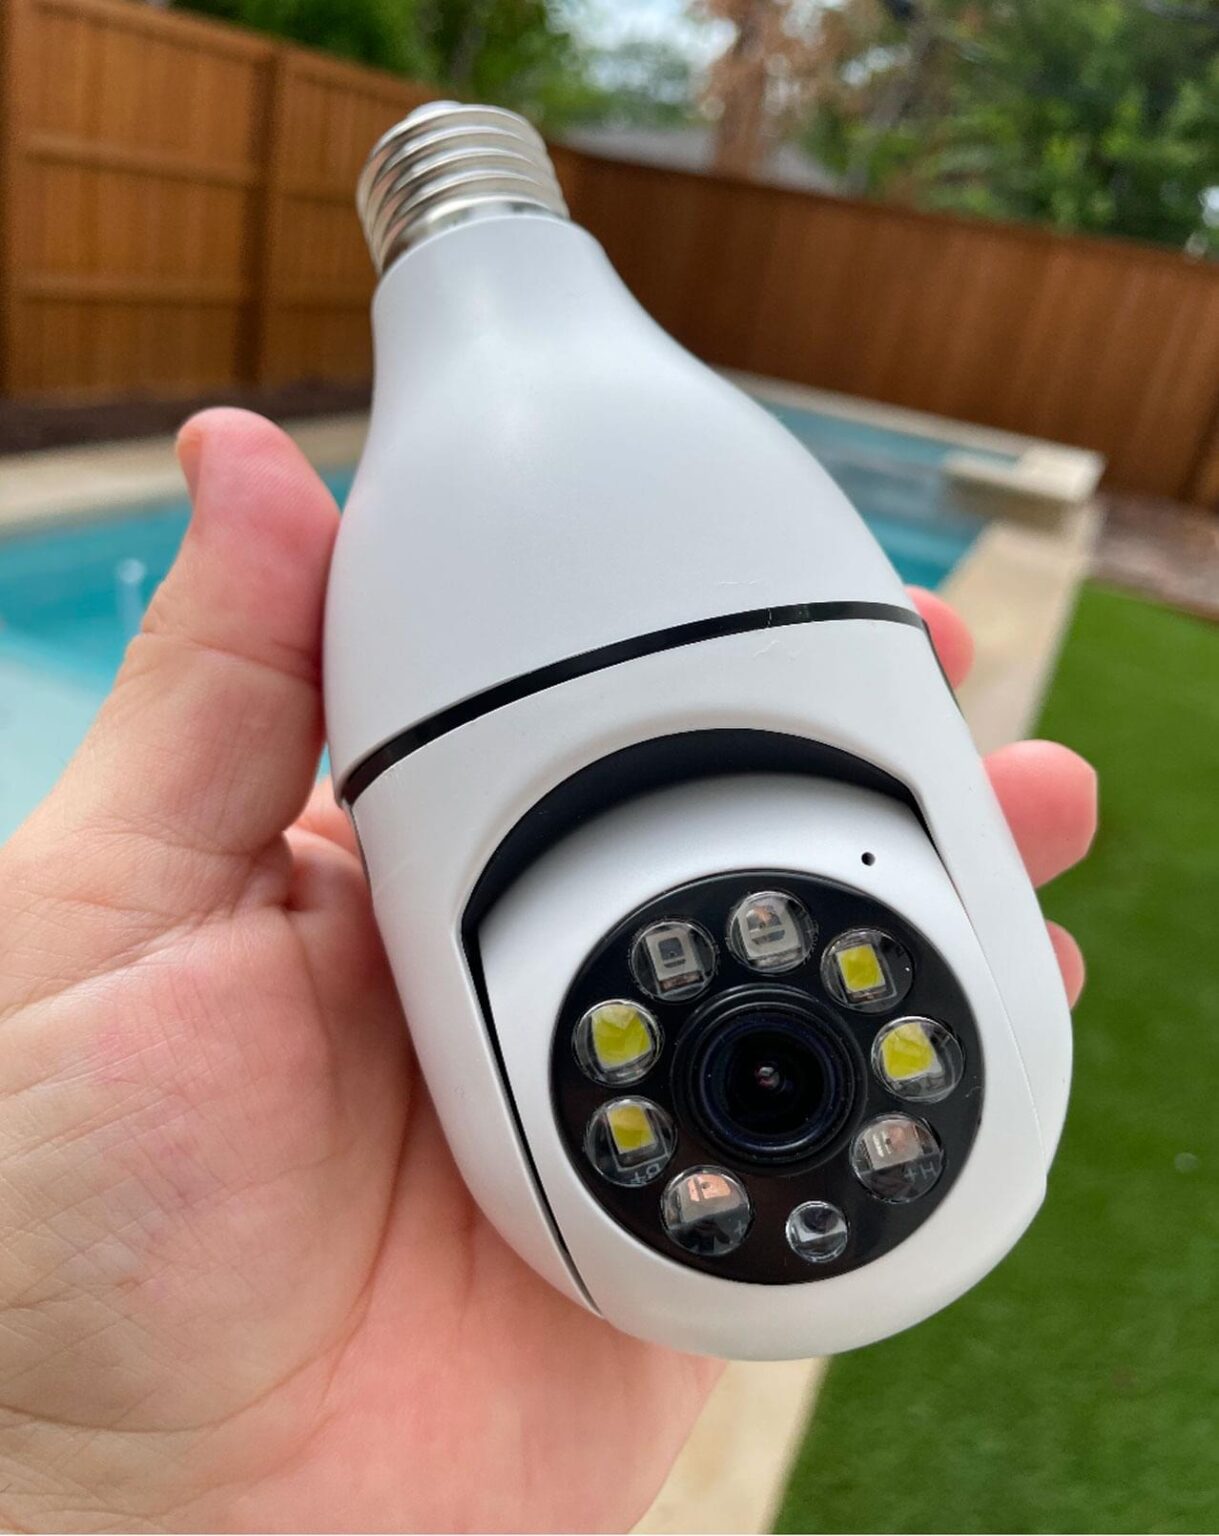 Light Socket Security Camera Reviews Is This Security Camera Worth It?